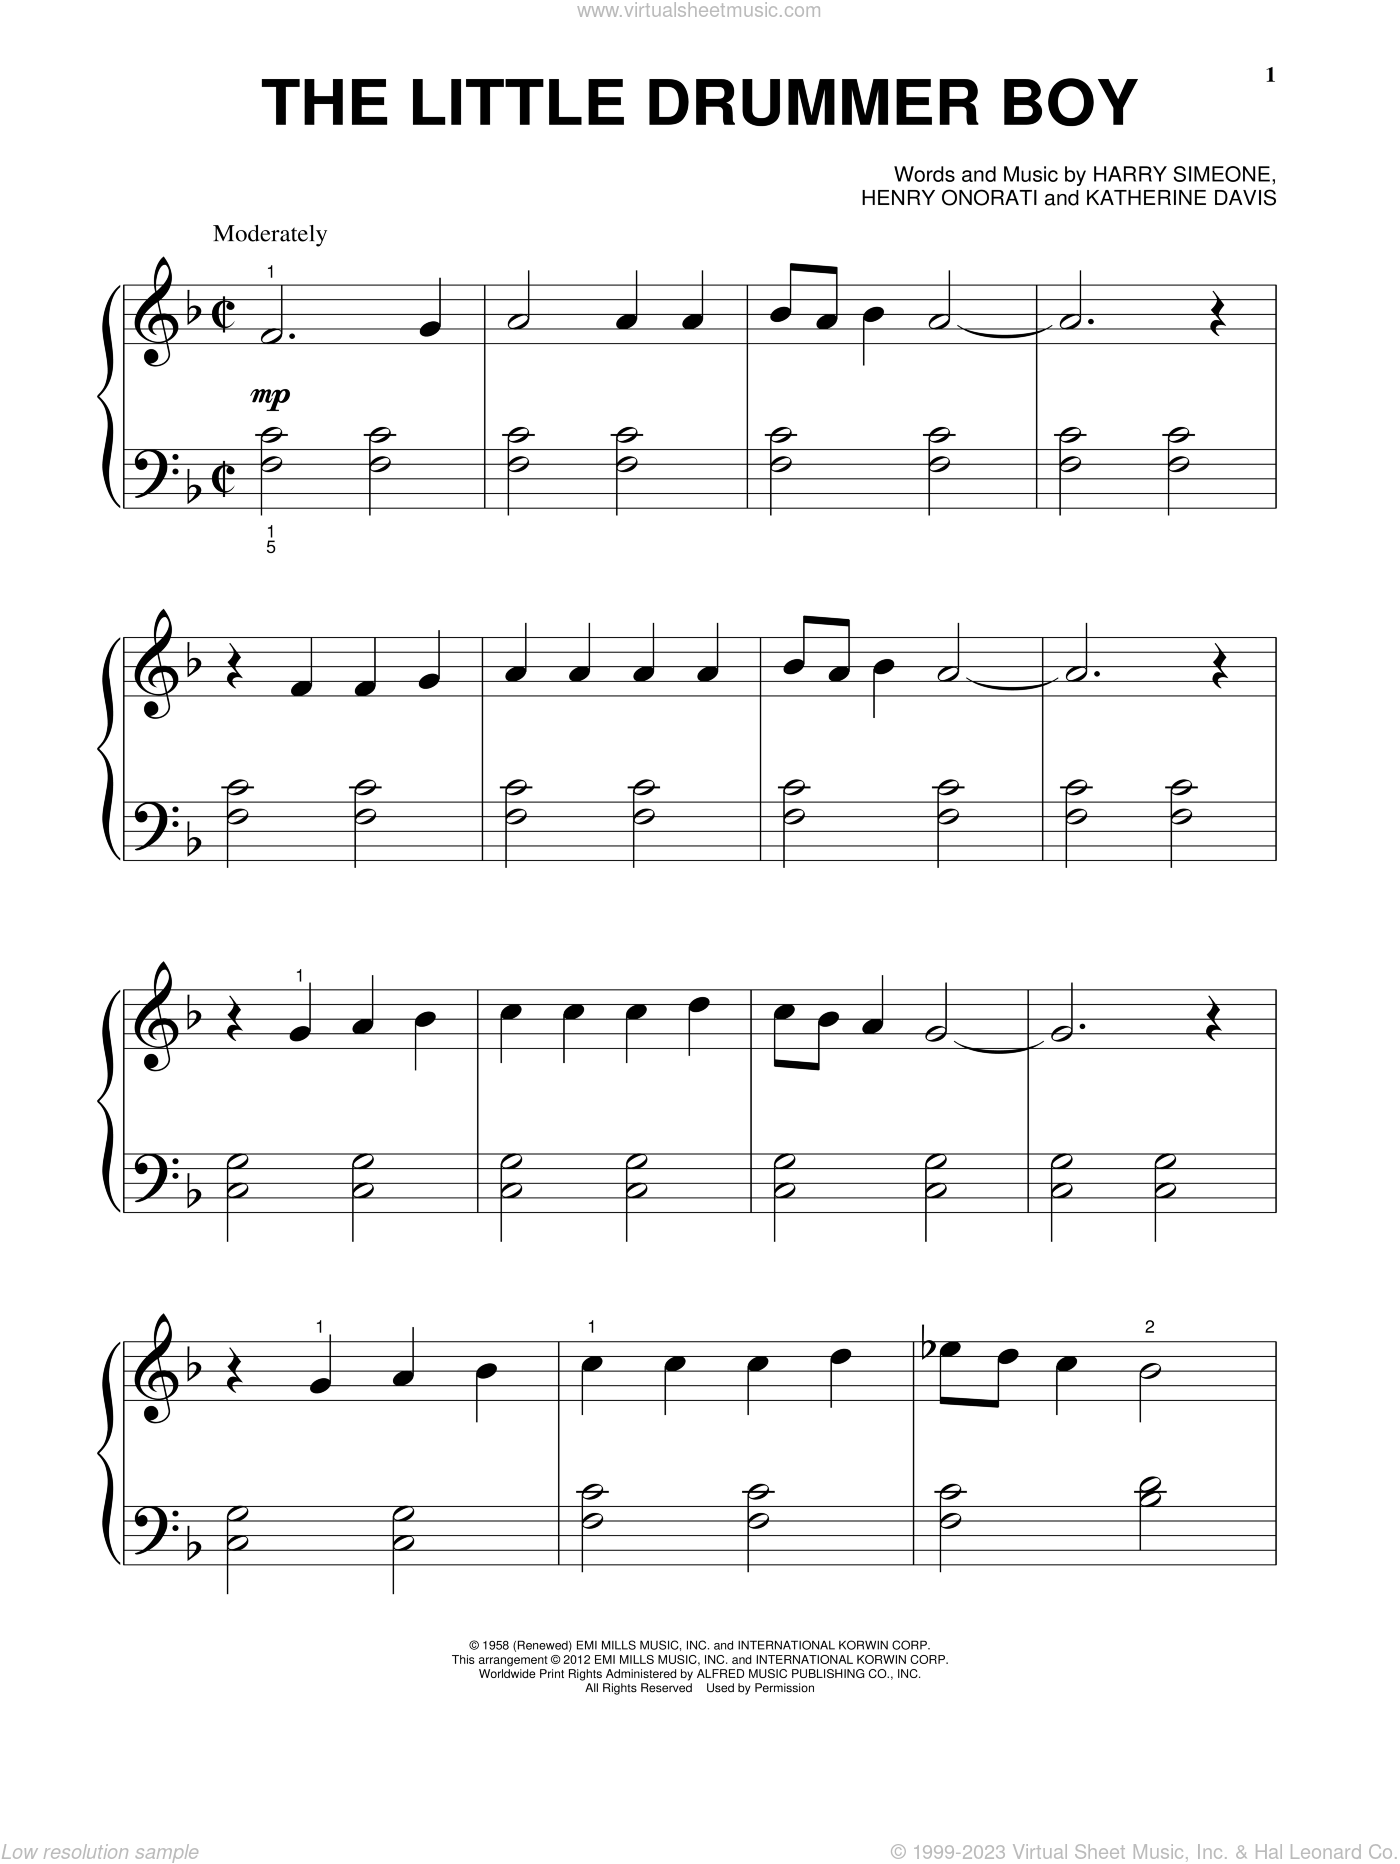 The Little Drummer Boy sheet music for piano solo big 